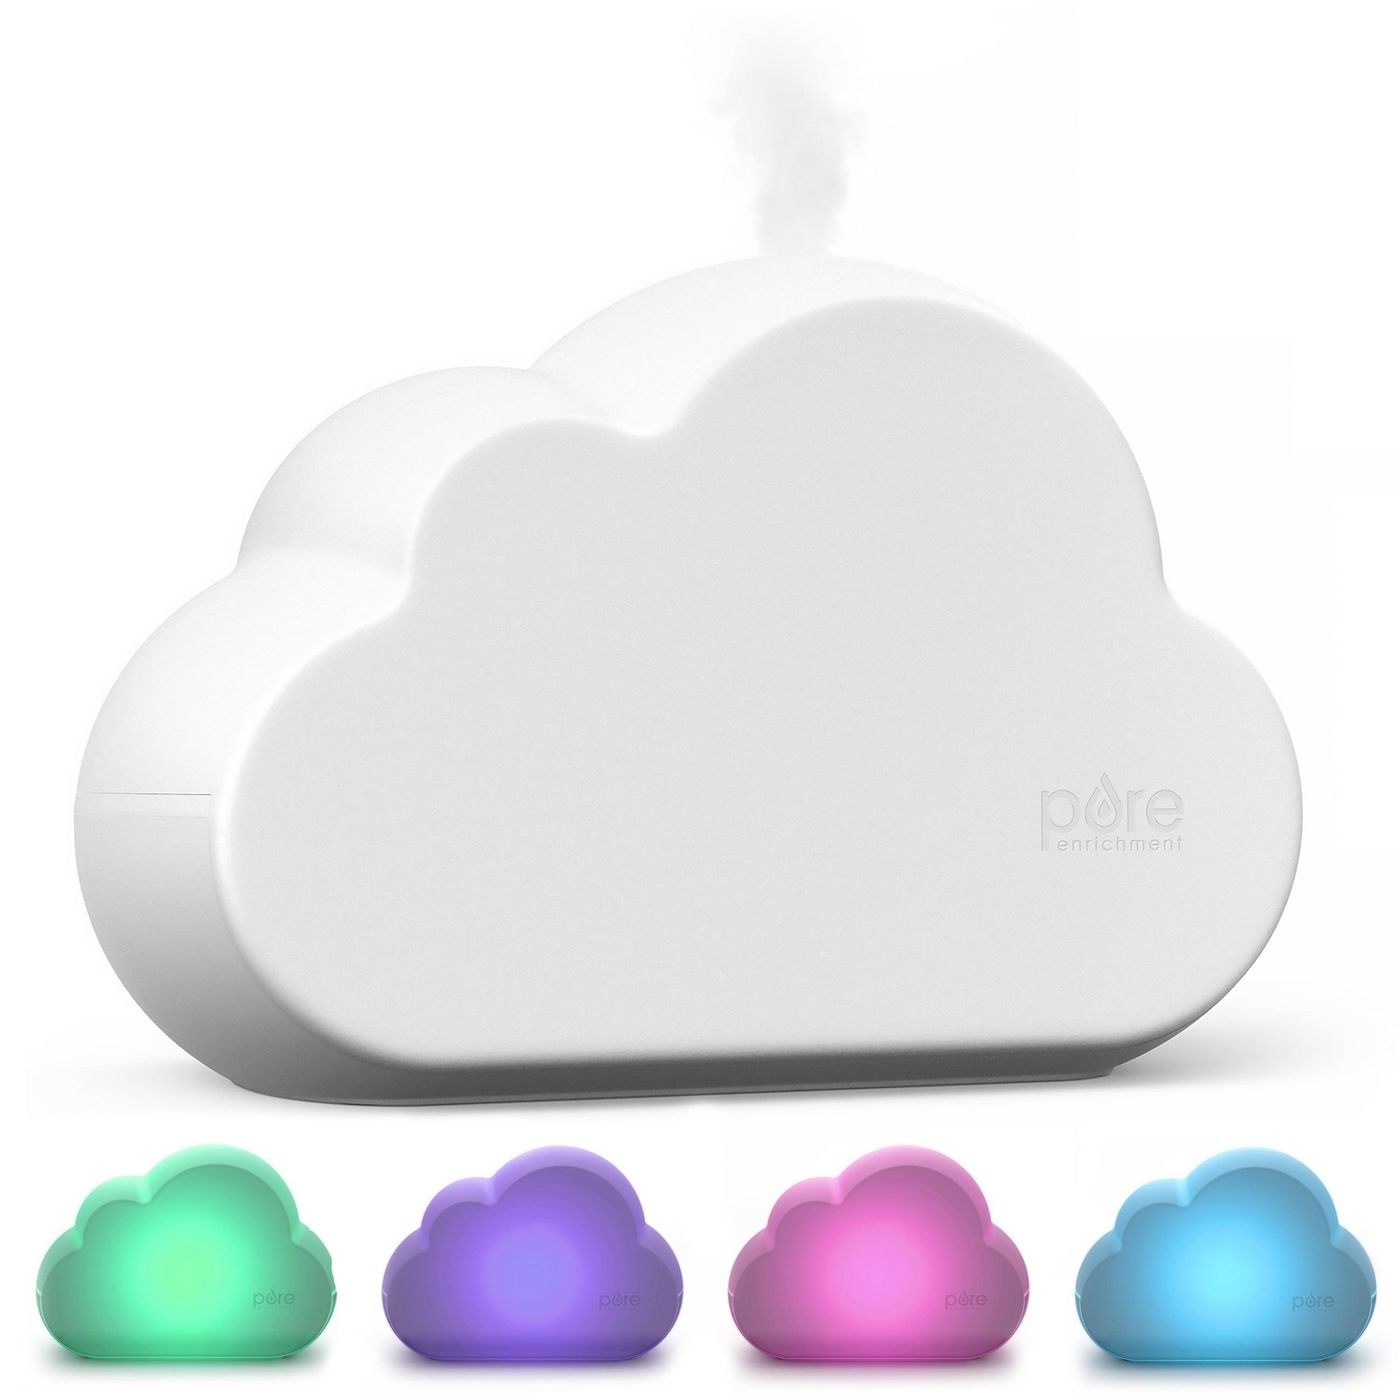 The cloud-shaped humidifier and some of the colors it changes to